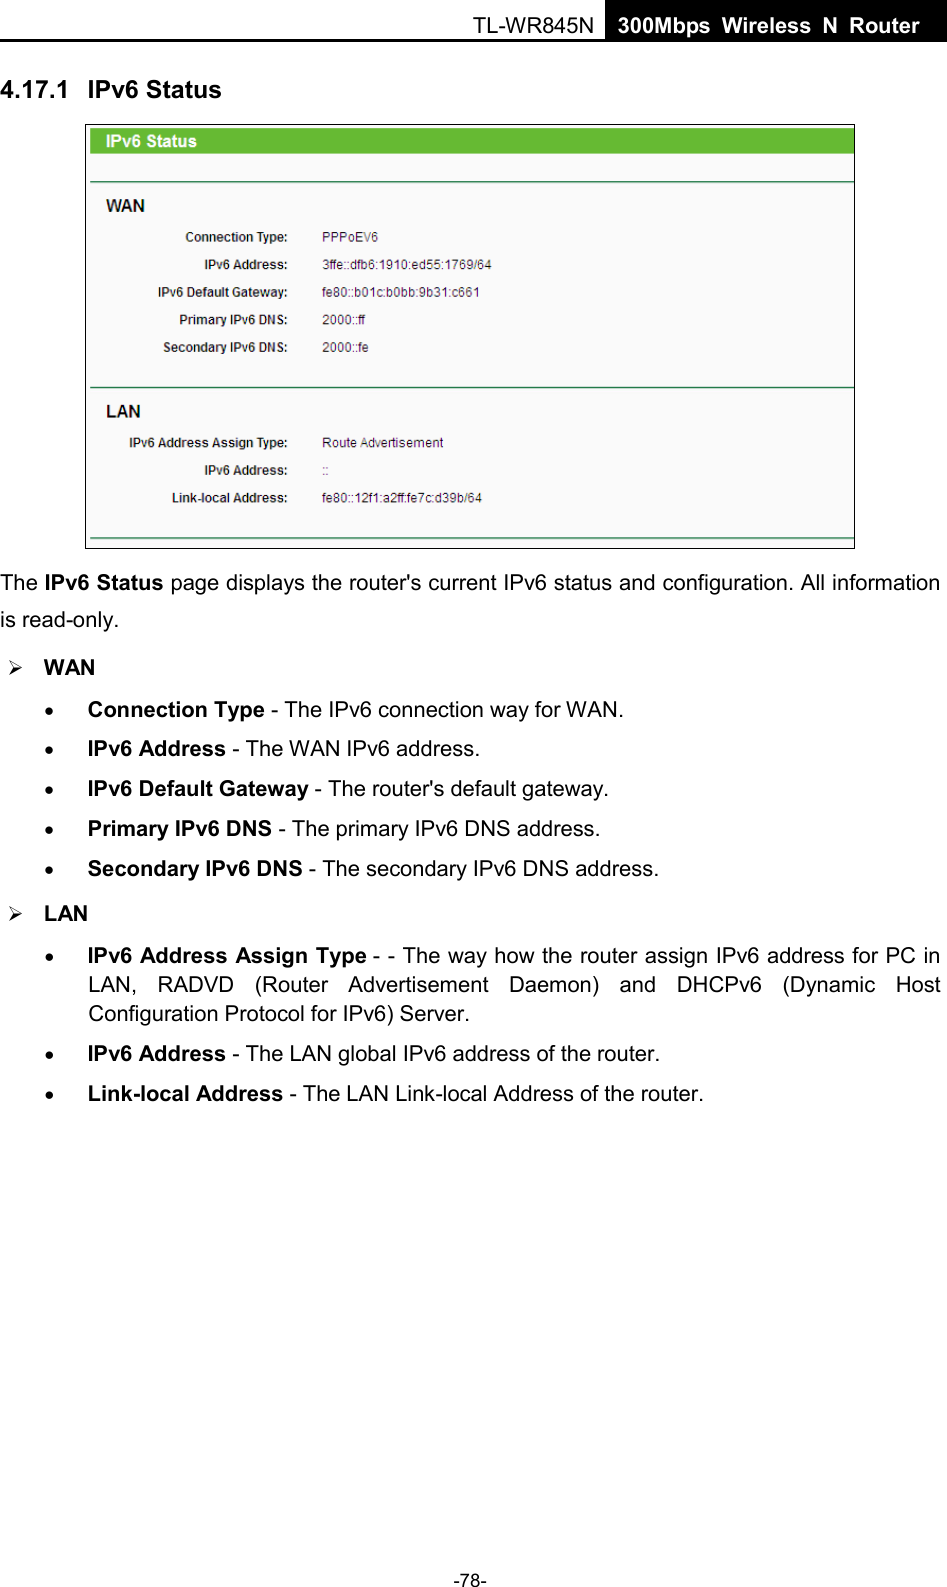  TL-WR845N  300Mbps Wireless N Router    4.17.1 IPv6 Status  The IPv6 Status page displays the router&apos;s current IPv6 status and configuration. All information is read-only.    WAN   • Connection Type - The IPv6 connection way for WAN. • IPv6 Address - The WAN IPv6 address. • IPv6 Default Gateway - The router&apos;s default gateway. • Primary IPv6 DNS - The primary IPv6 DNS address. • Secondary IPv6 DNS - The secondary IPv6 DNS address.  LAN • IPv6 Address Assign Type - - The way how the router assign IPv6 address for PC in LAN, RADVD (Router Advertisement Daemon) and DHCPv6 (Dynamic Host Configuration Protocol for IPv6) Server. • IPv6 Address - The LAN global IPv6 address of the router. • Link-local Address - The LAN Link-local Address of the router. -78- 